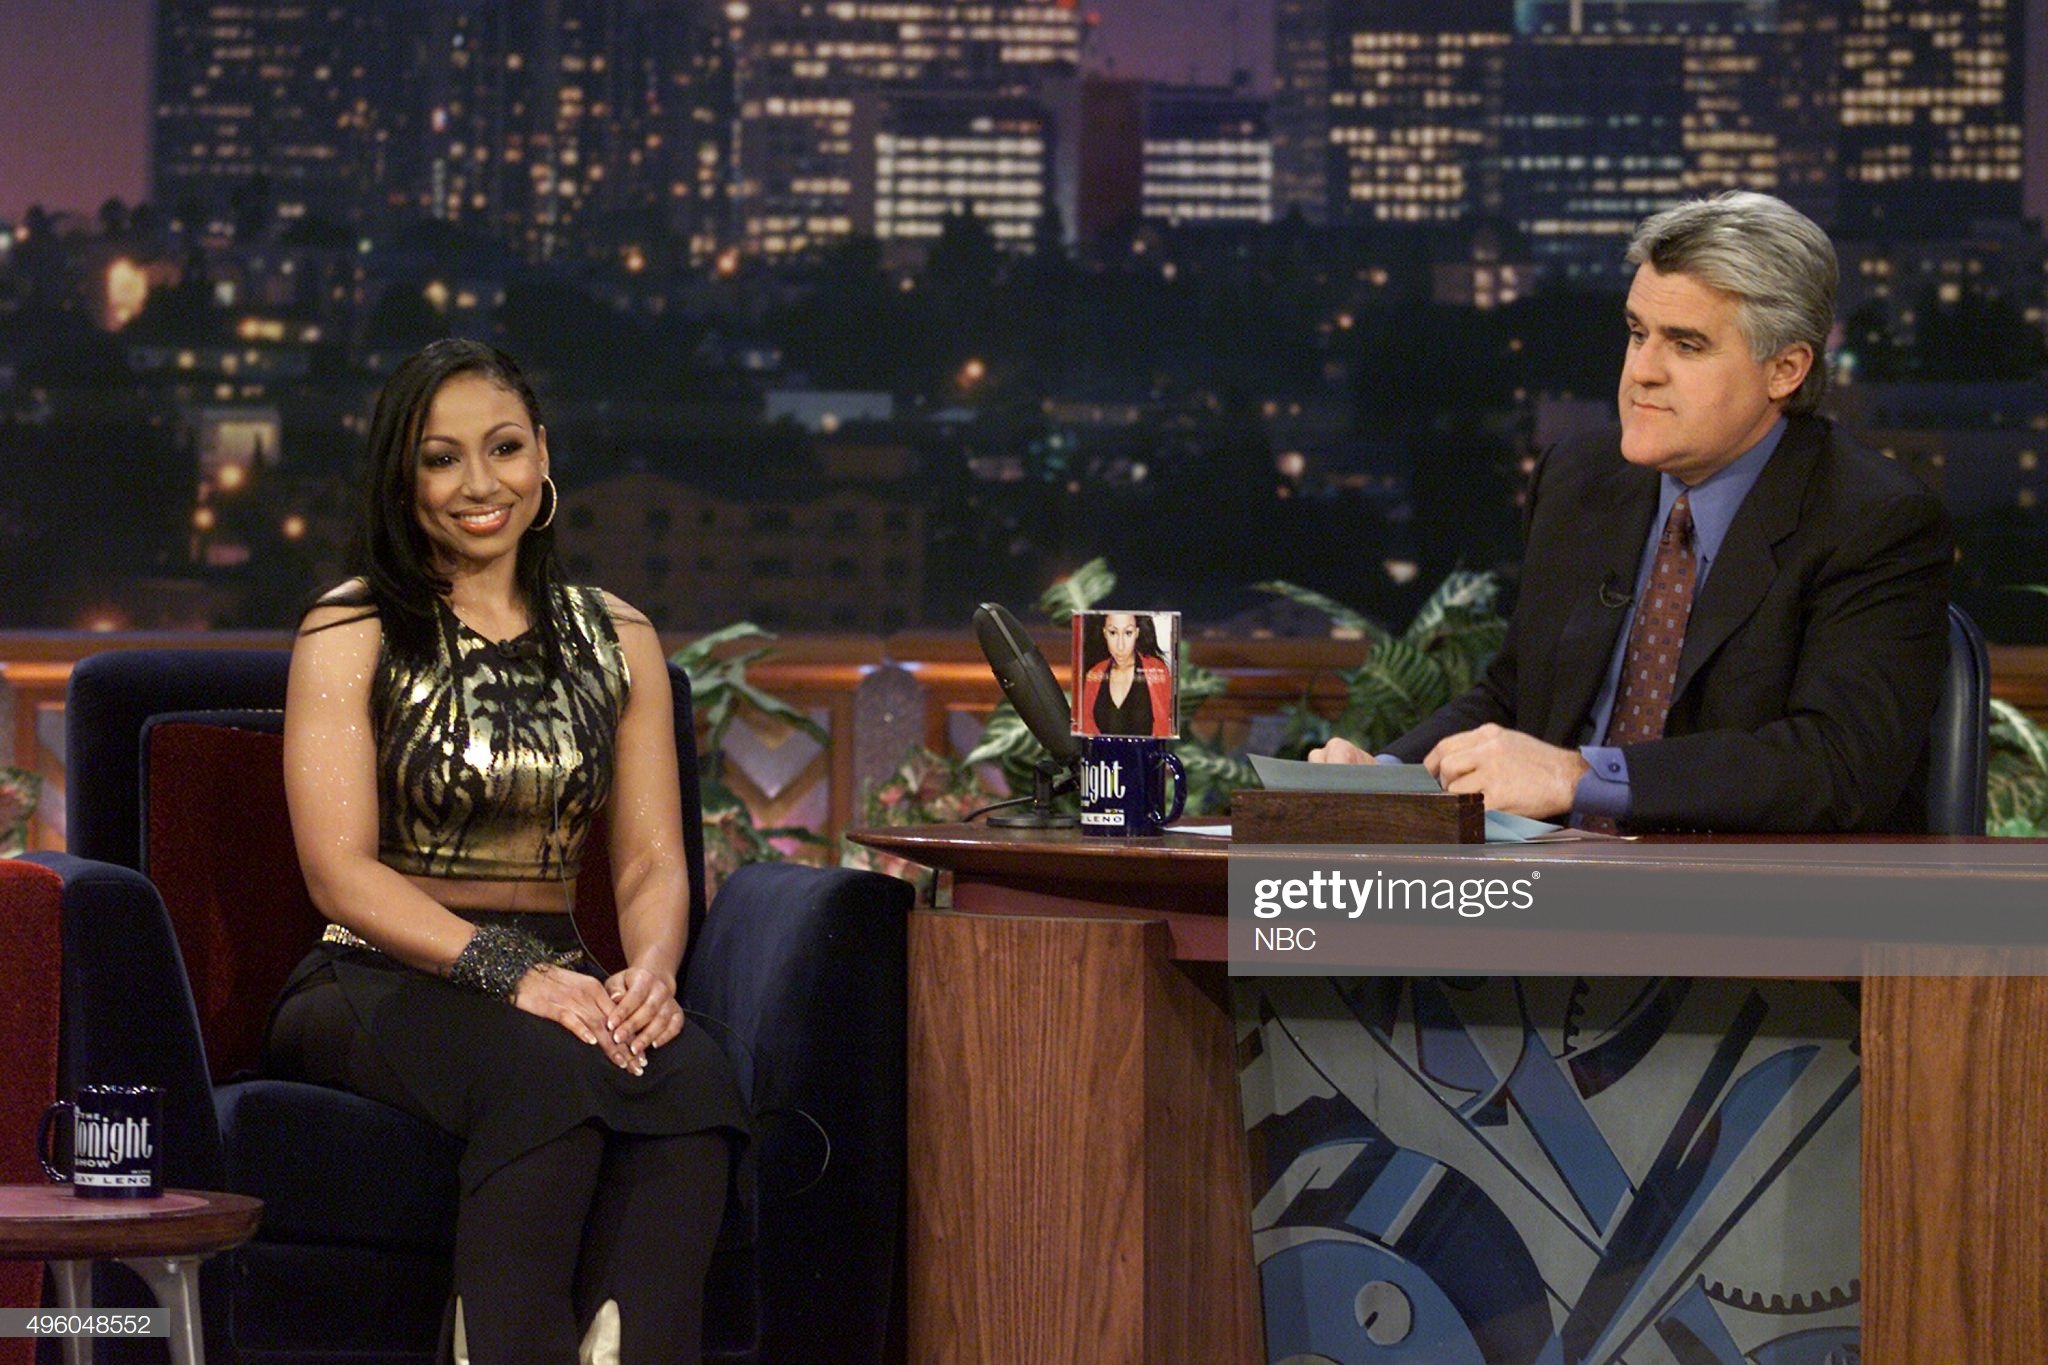  THE TONIGHT SHOW WITH JAY LENO -- Episode 1970 -- Pictured: (l-r) Musical guest Debelah Morgan during an interview with host Jay Leno on January 3, 2001 -- (Photo by: Paul Drinkwater/NBC/NBCU Photo Bank via Getty Images) 